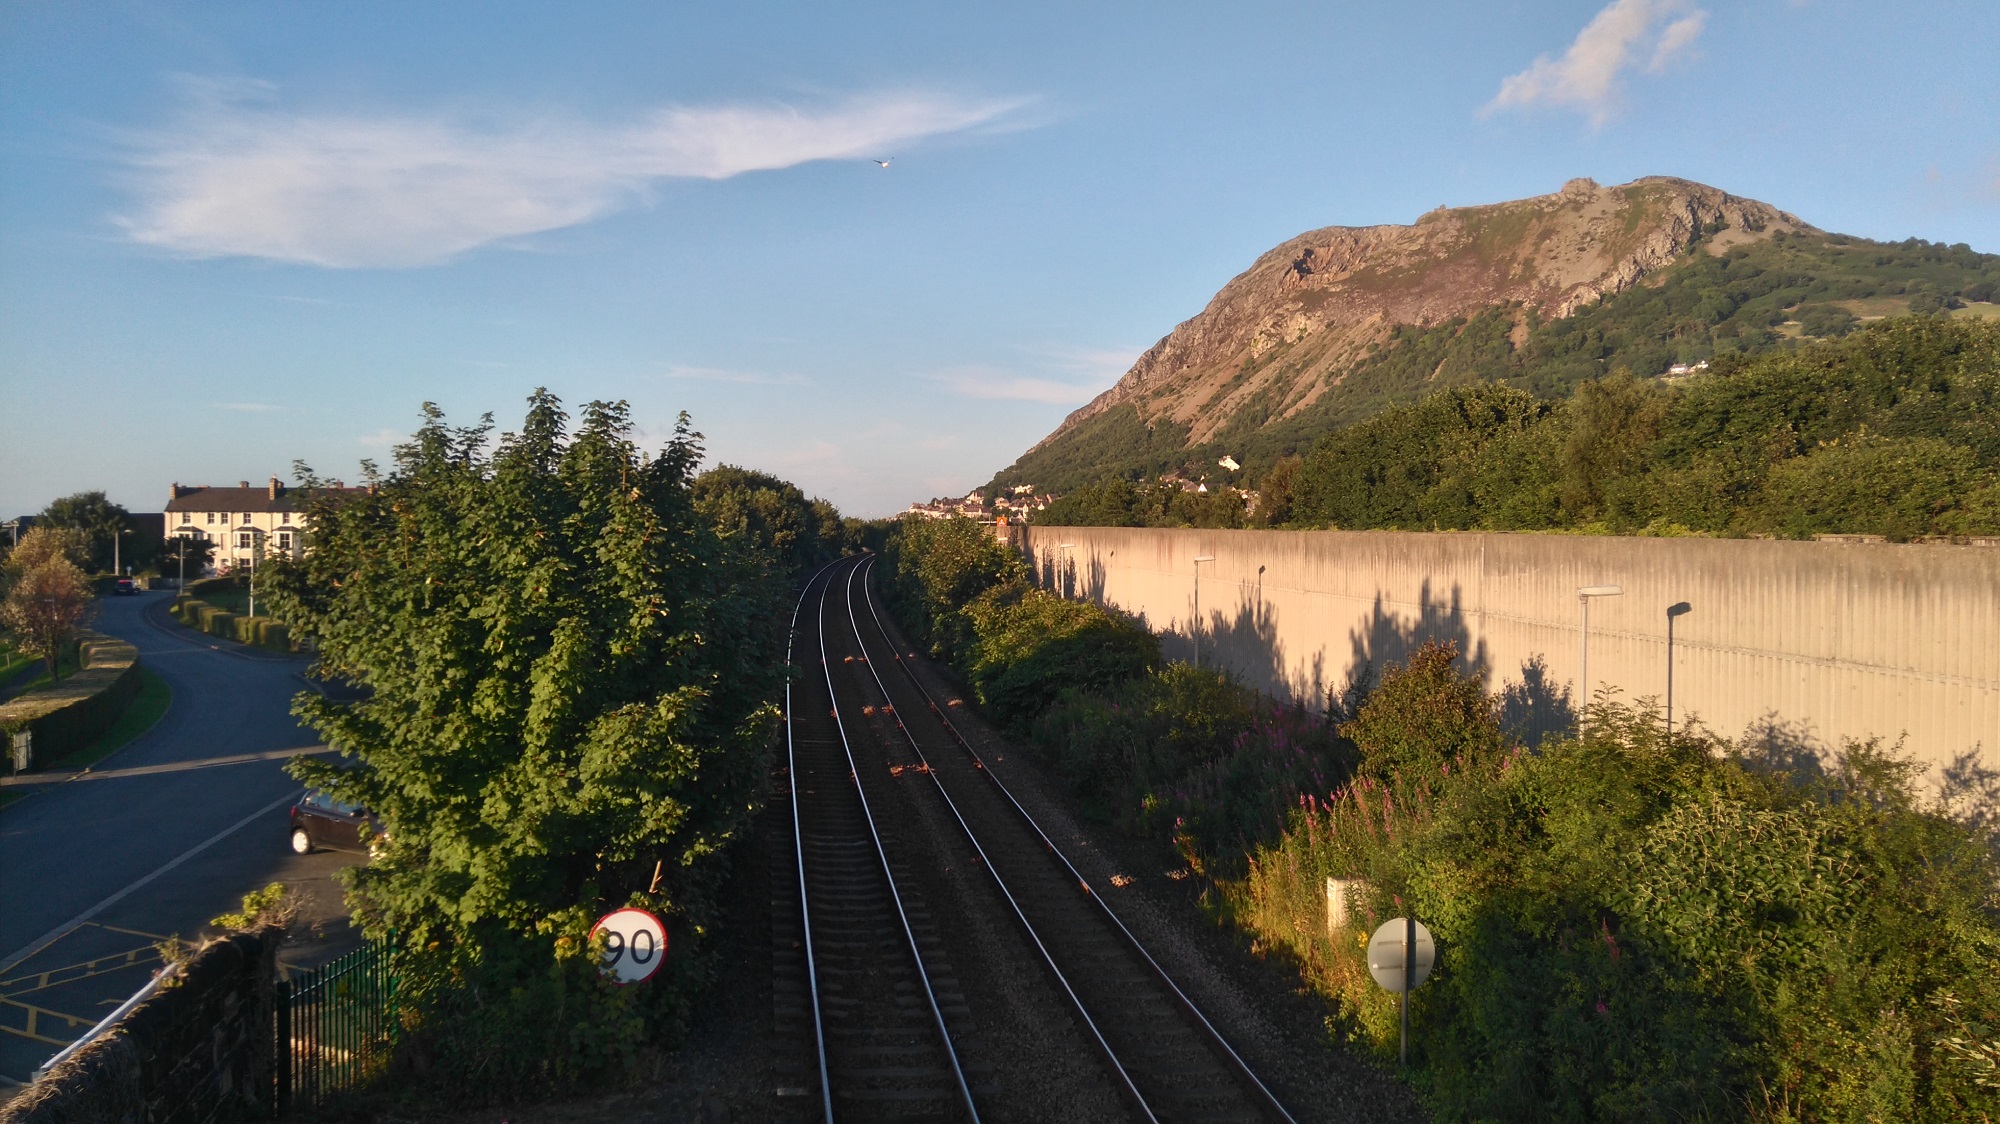 Railway tracks stretch into the distance overlooked by a mountain in Wales on a sunny summer evening. Llanfairfechan.